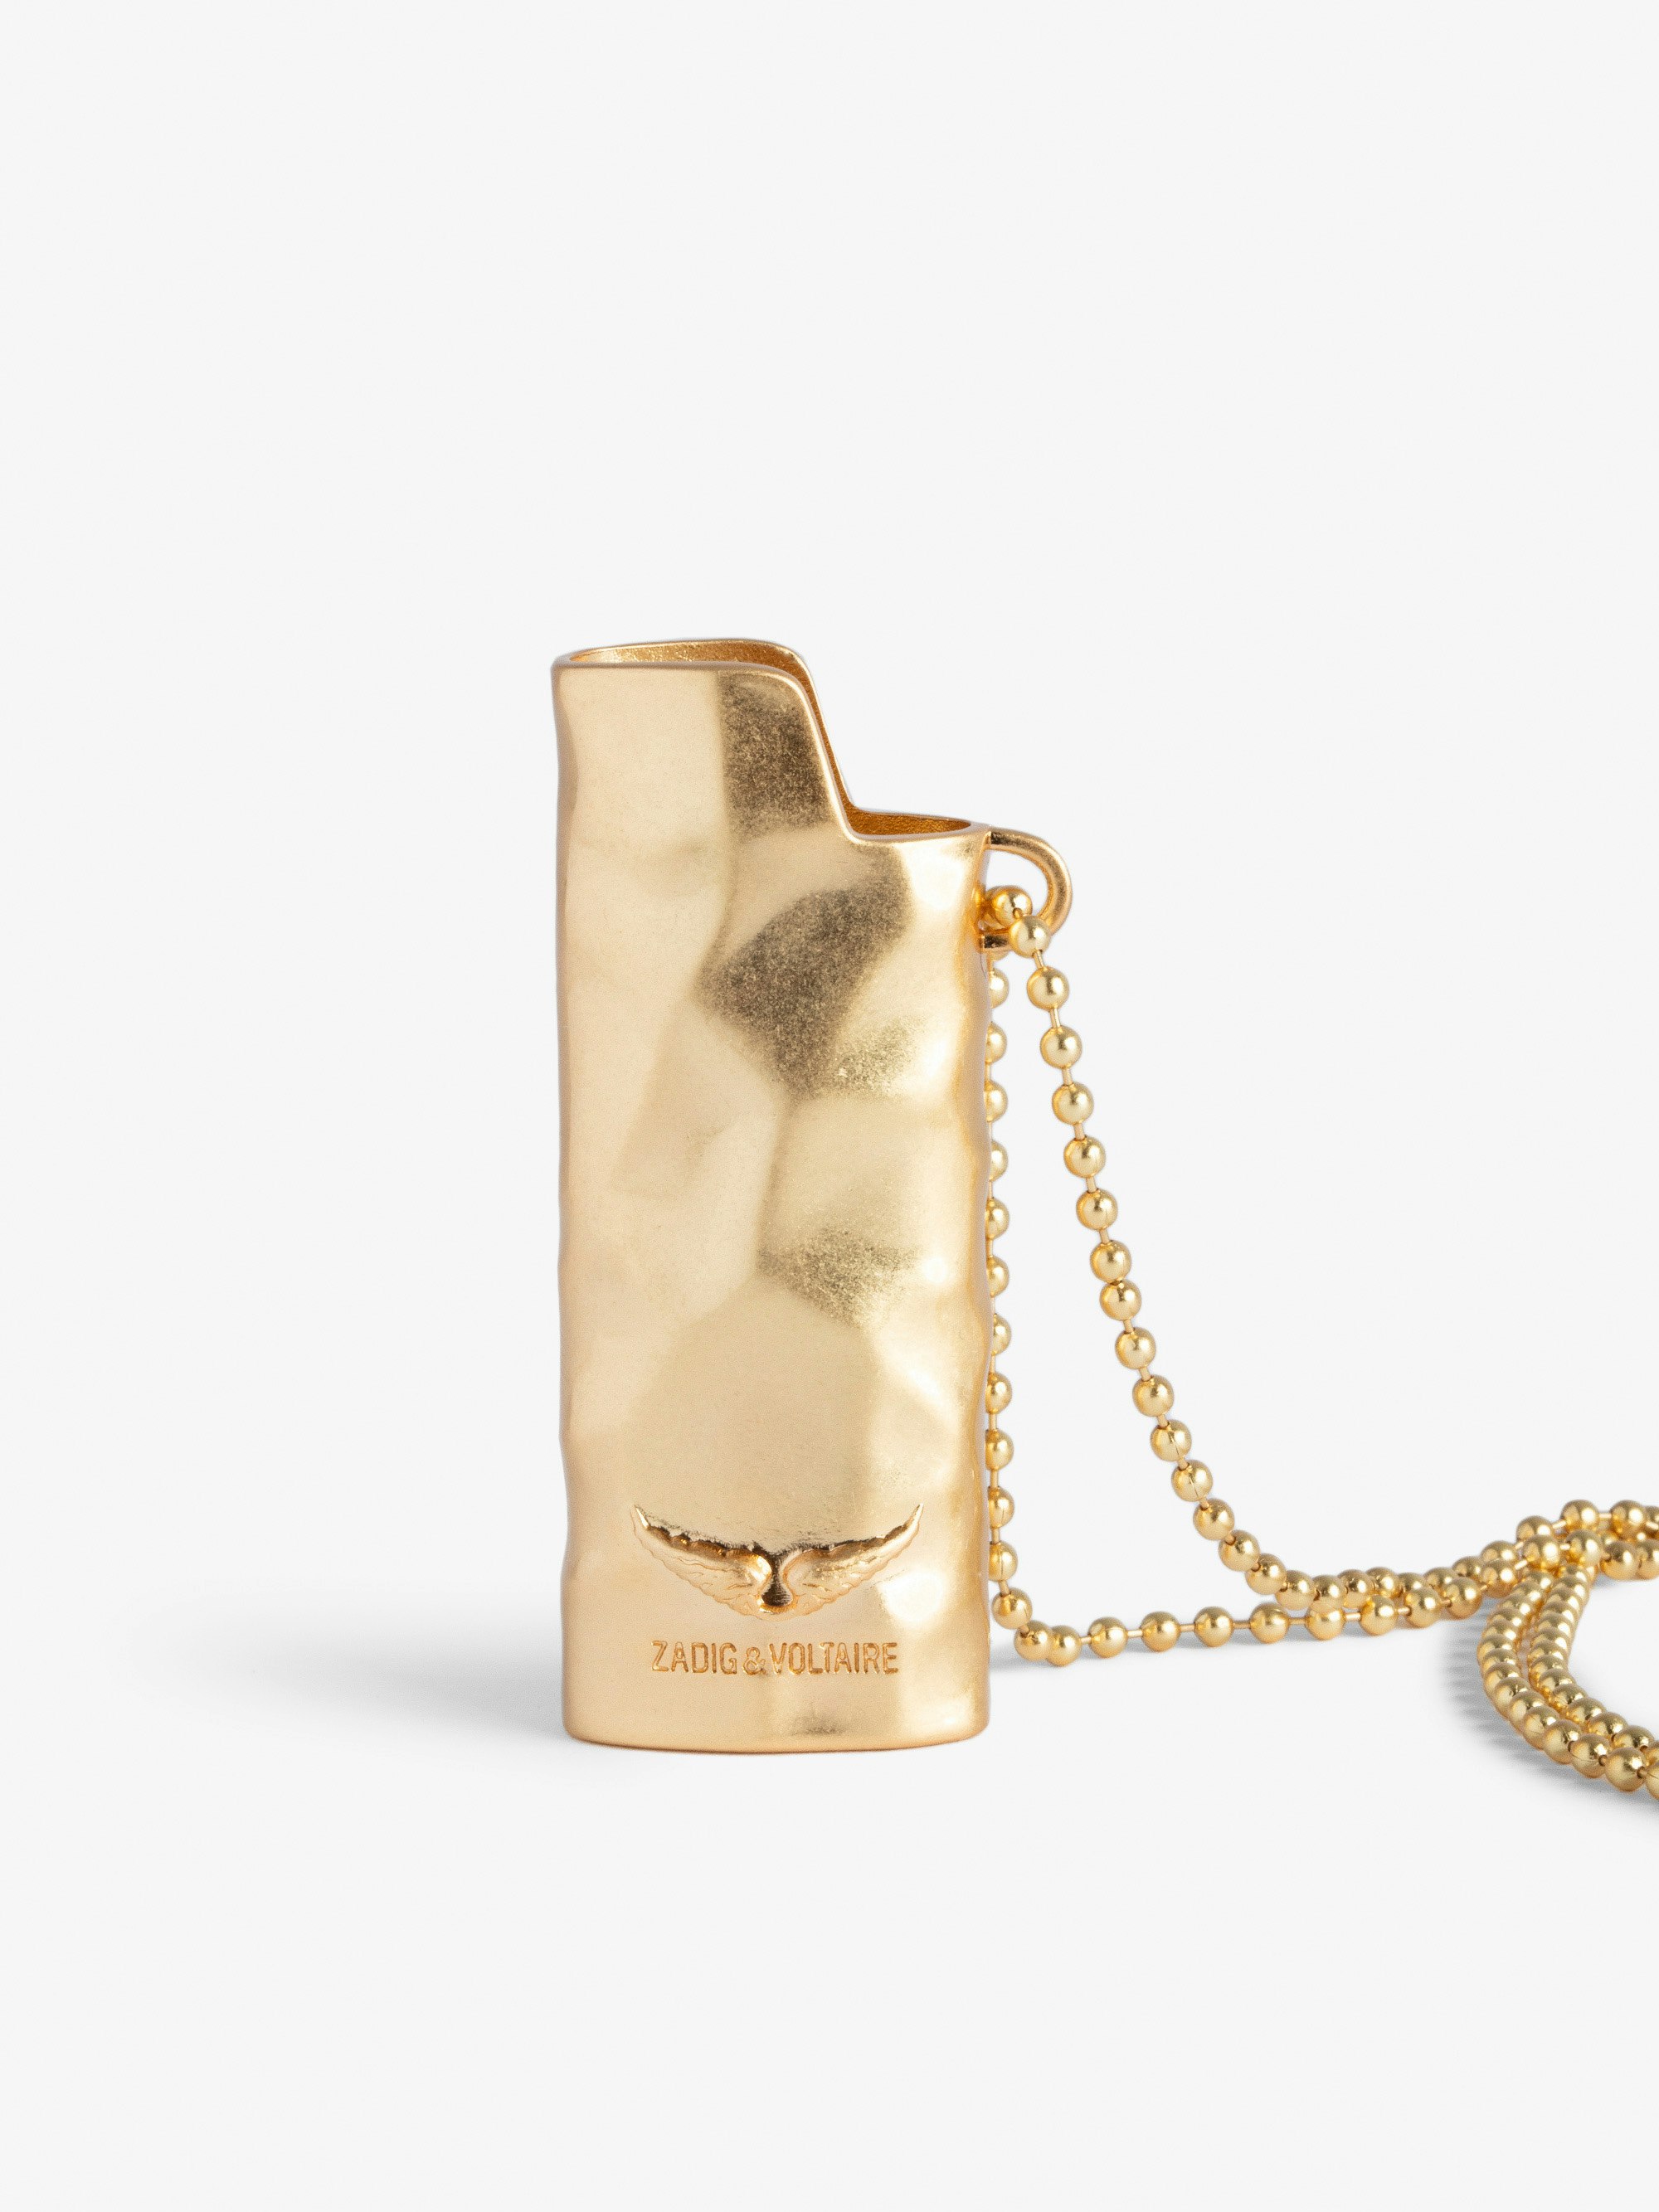 Heart on Fire Lighter Holder - Voltaire Vice gold-tone-metal lighter holder with removable chain, slogan and Zadig&Voltaire signature.